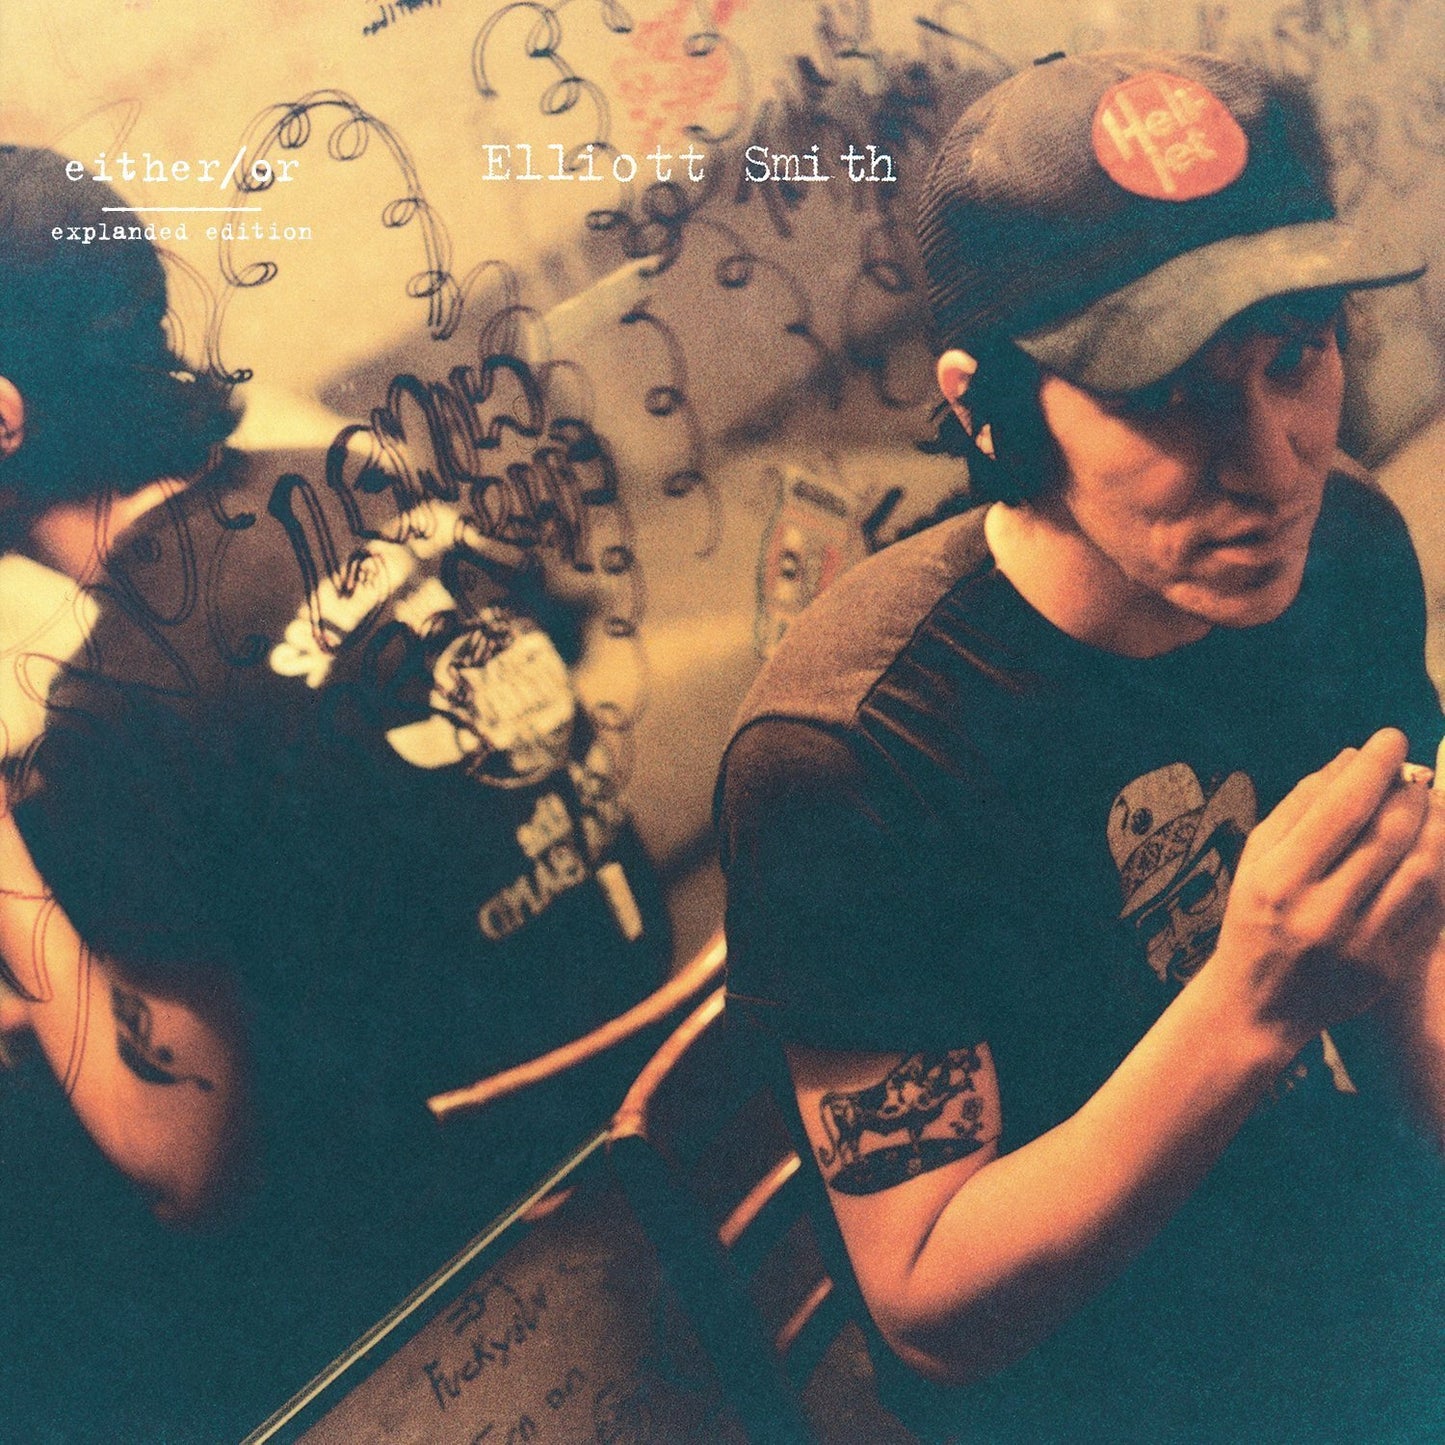  Elliott Smith – Either / Or: Expanded Edition | Buy the Vinyl LP from Flying Nun Records